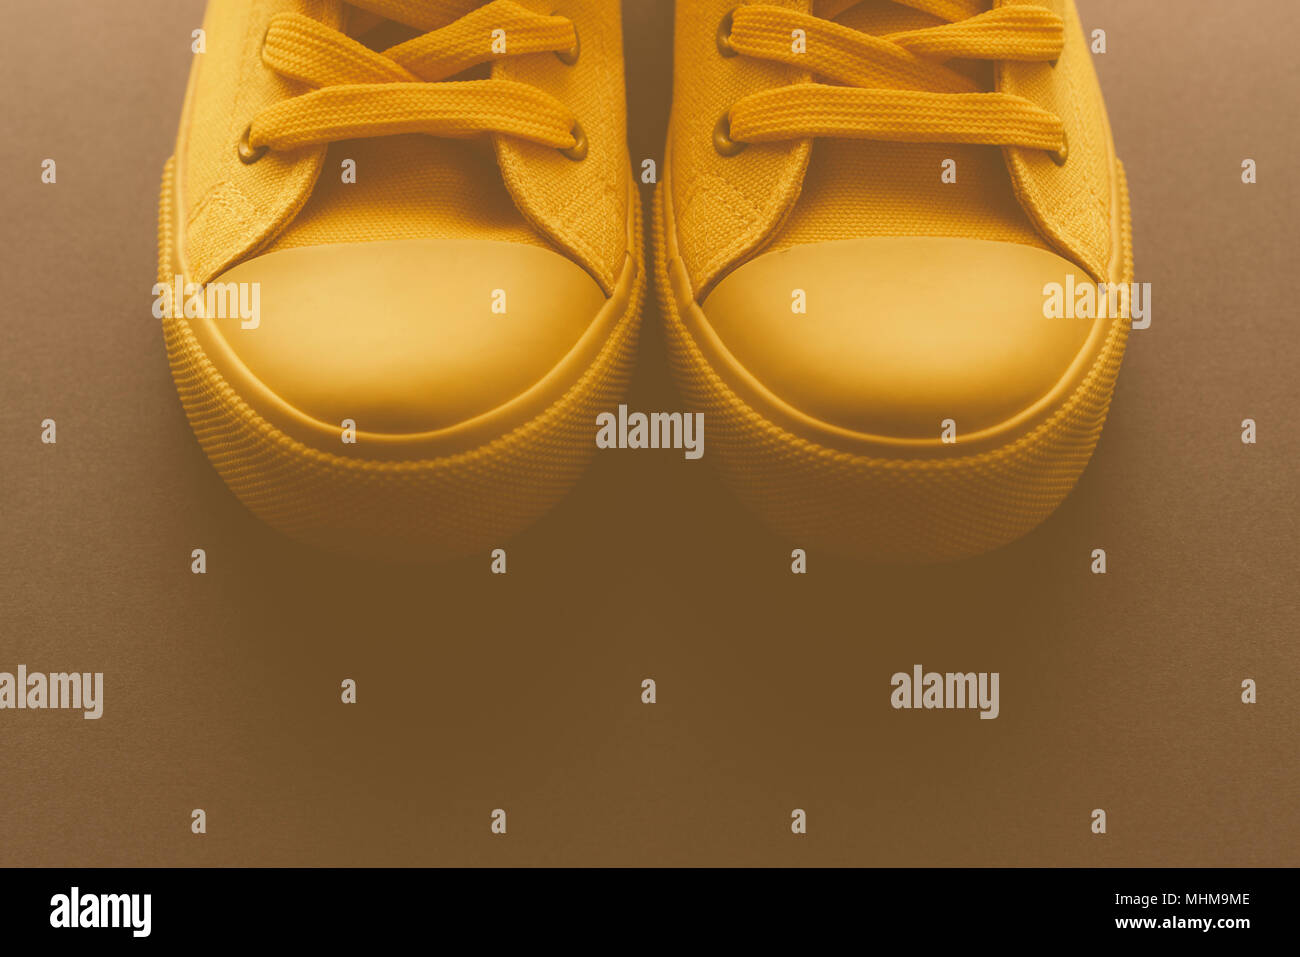 Brand new yellow sneakers on the floor, retro toned youth lifestyle footwear concept with copy space Stock Photo